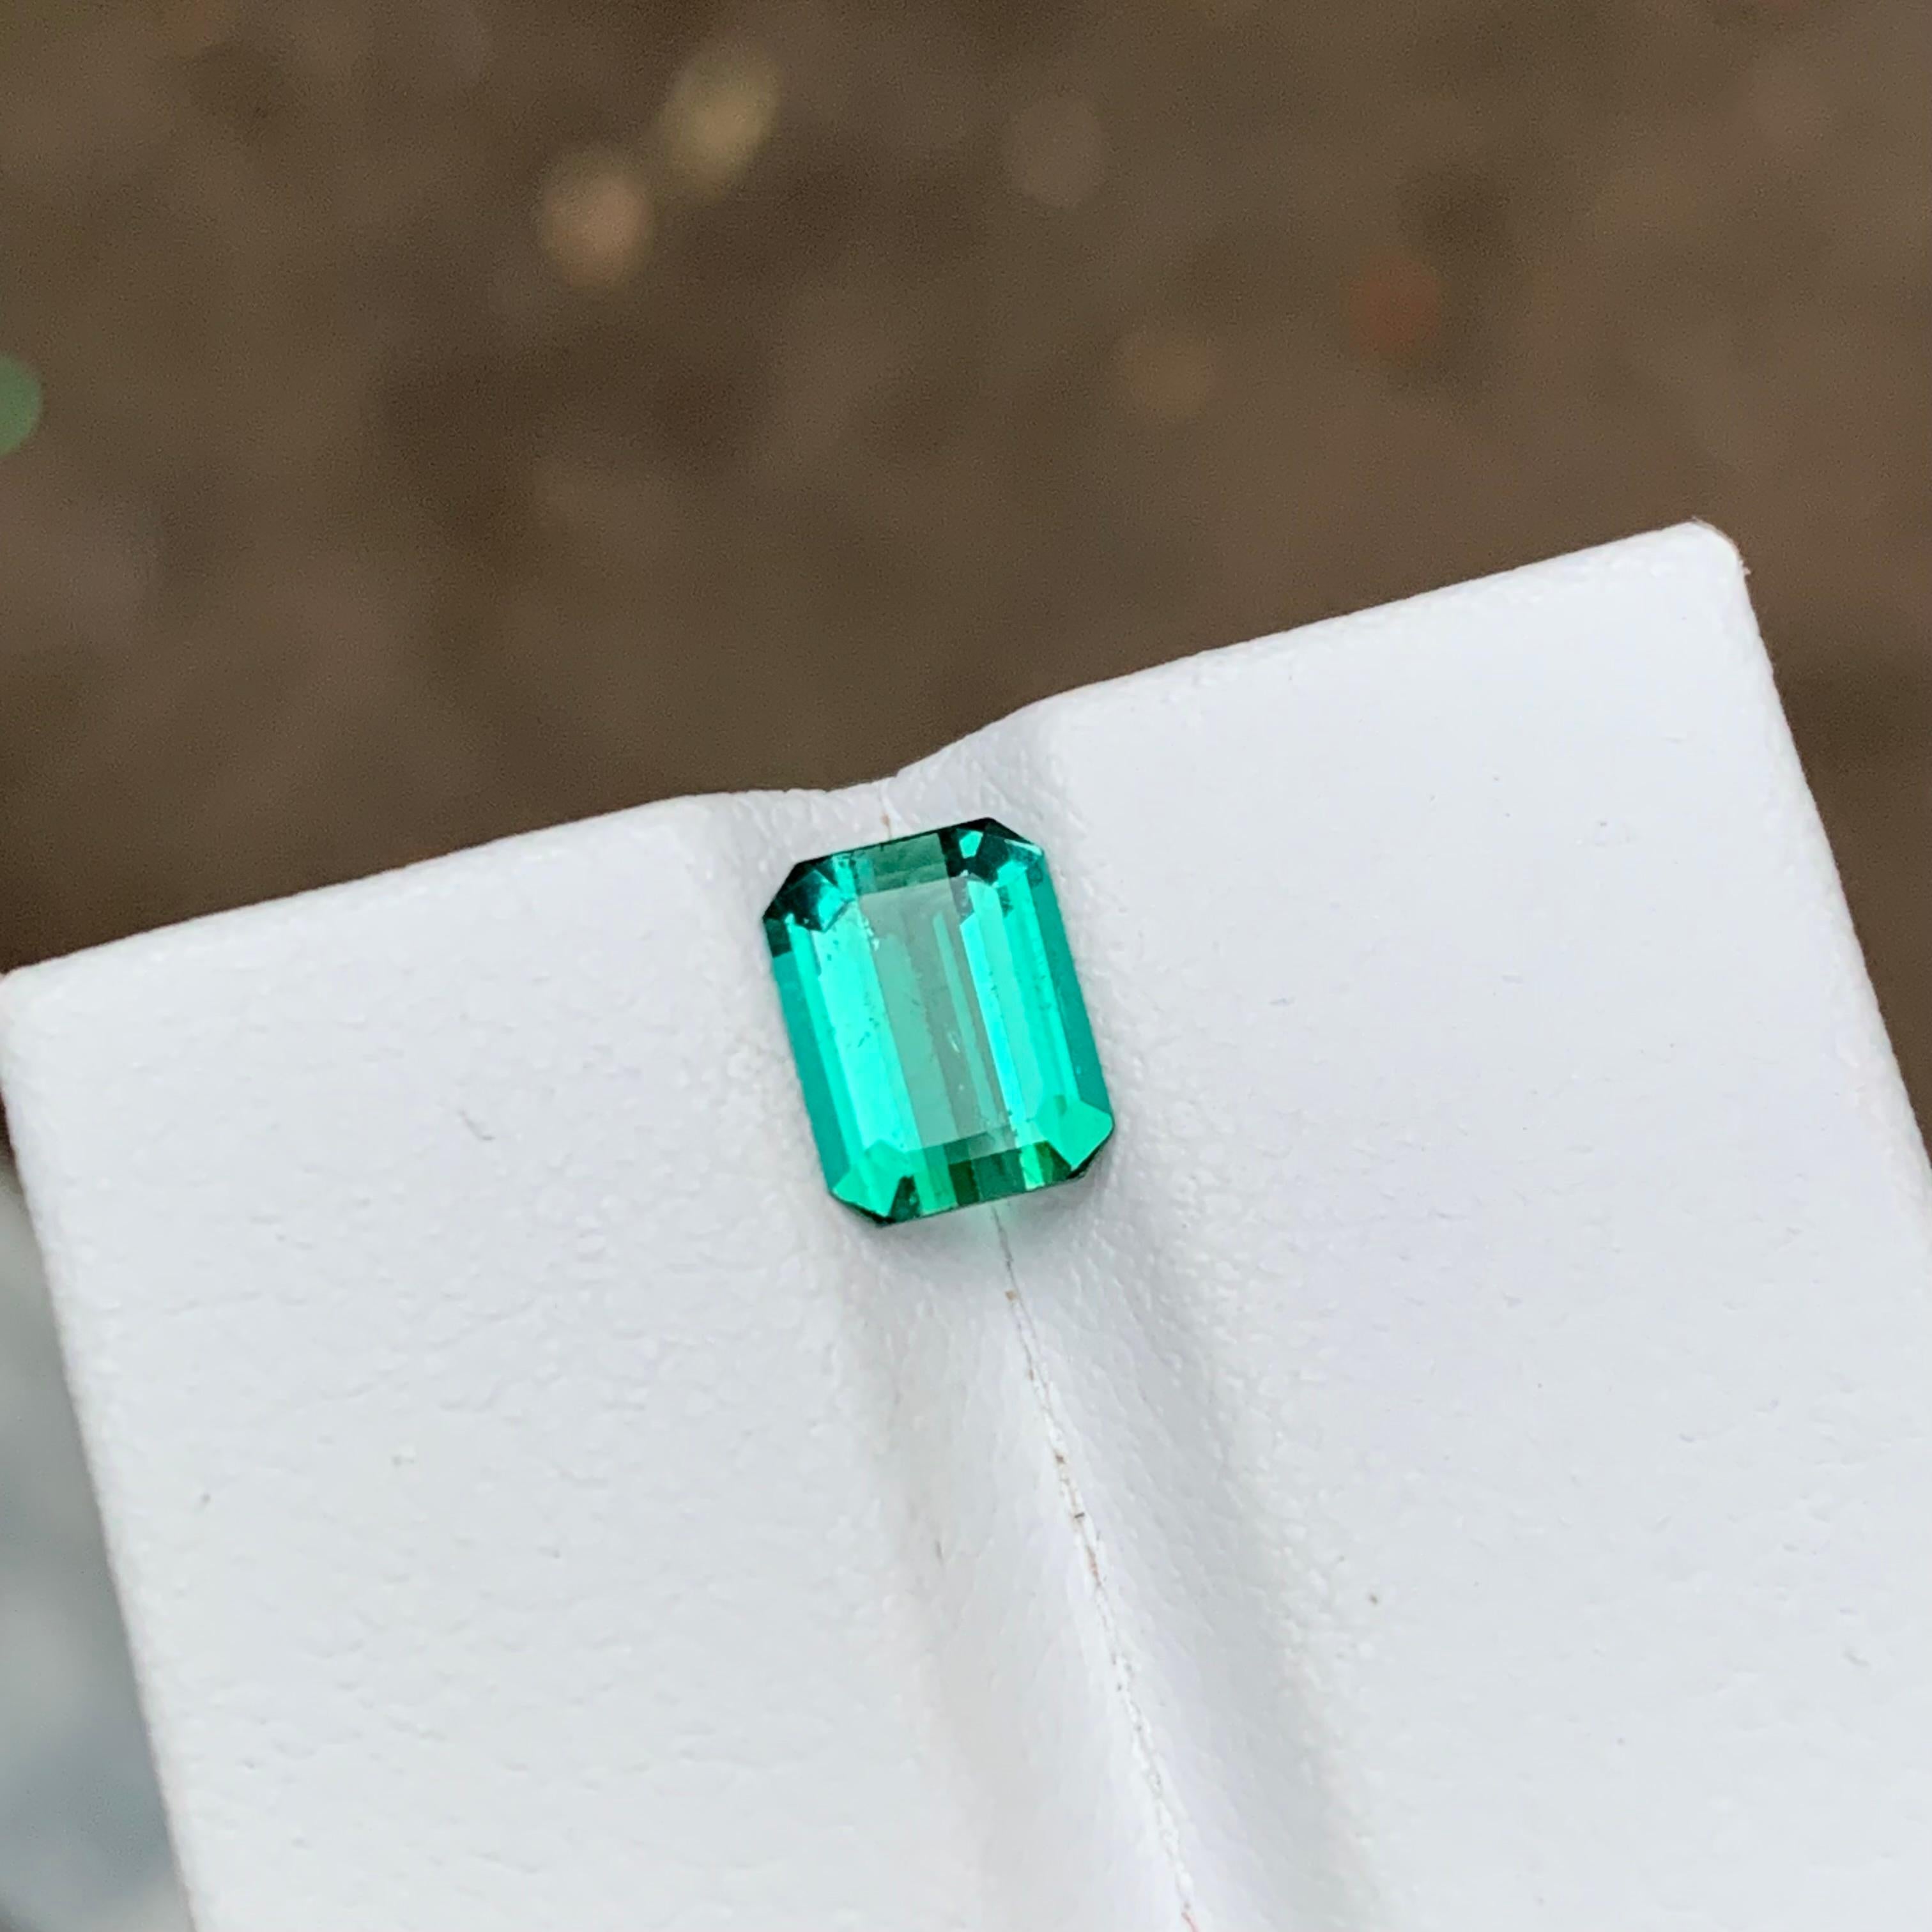 Rare Vibrant Bluish Neon Green Tourmaline Gemstone, 1.35 Ct Emerald Cut for Ring In New Condition For Sale In Peshawar, PK